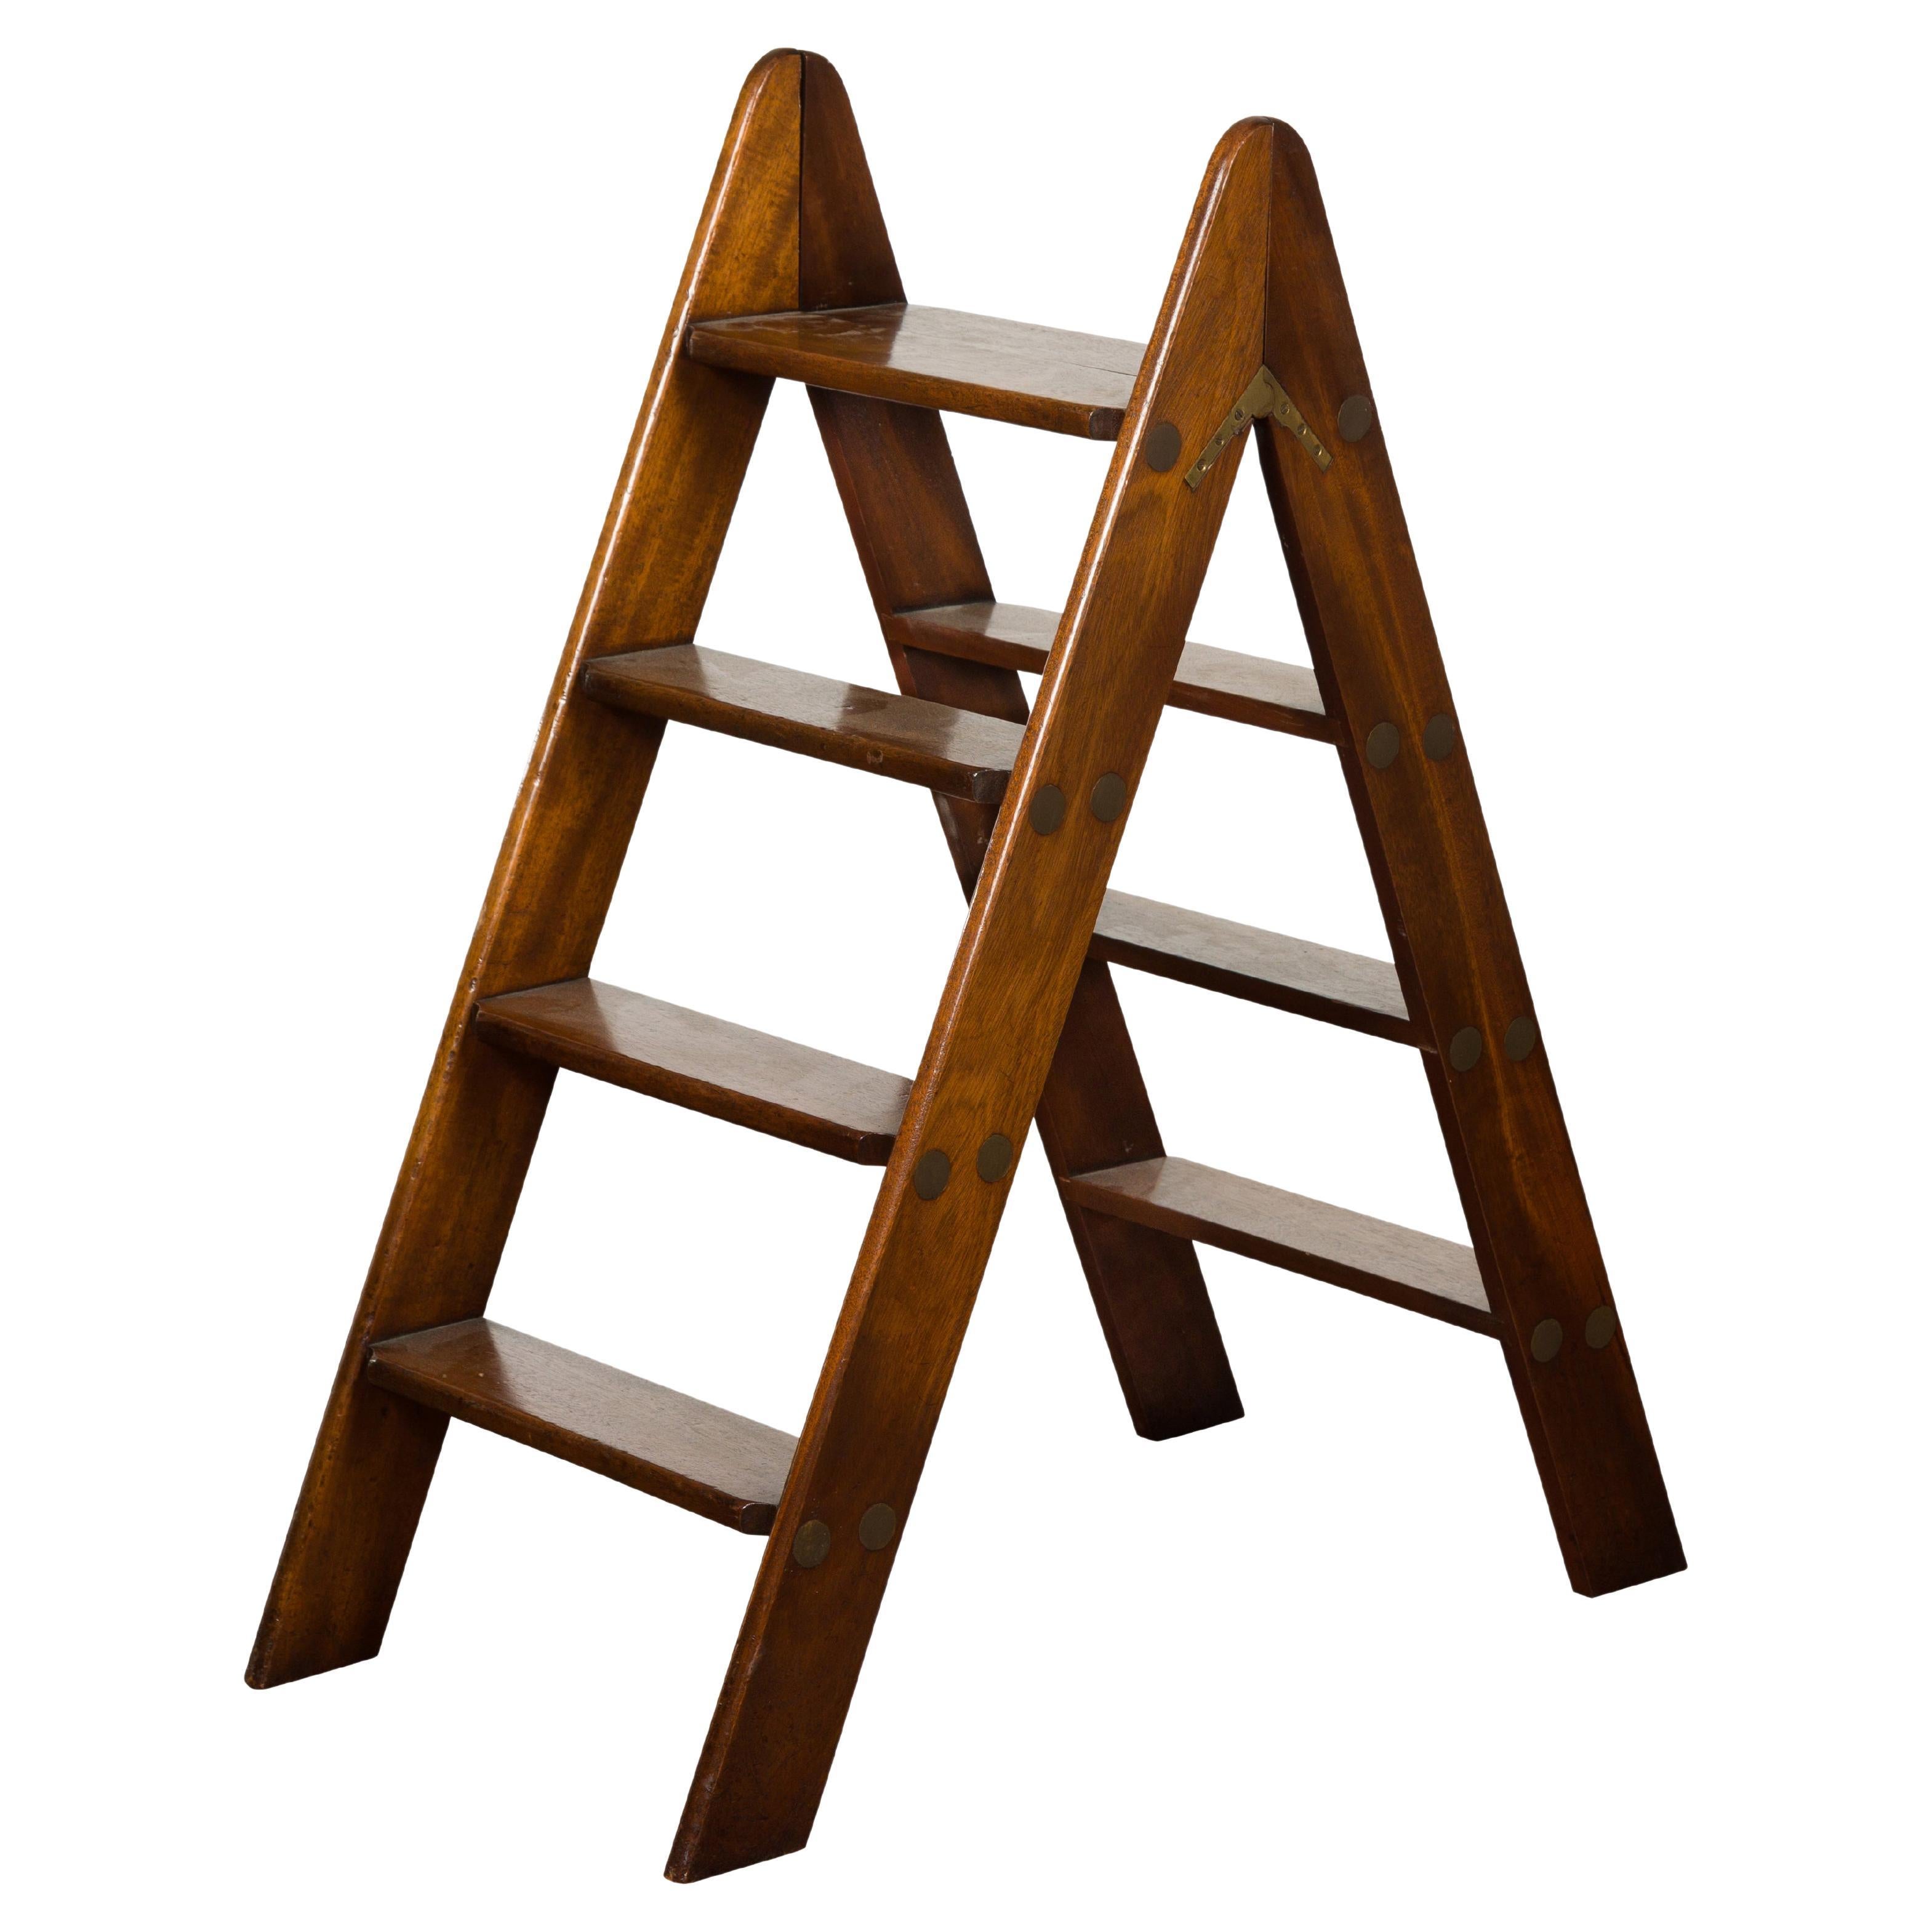 What are library ladders called?